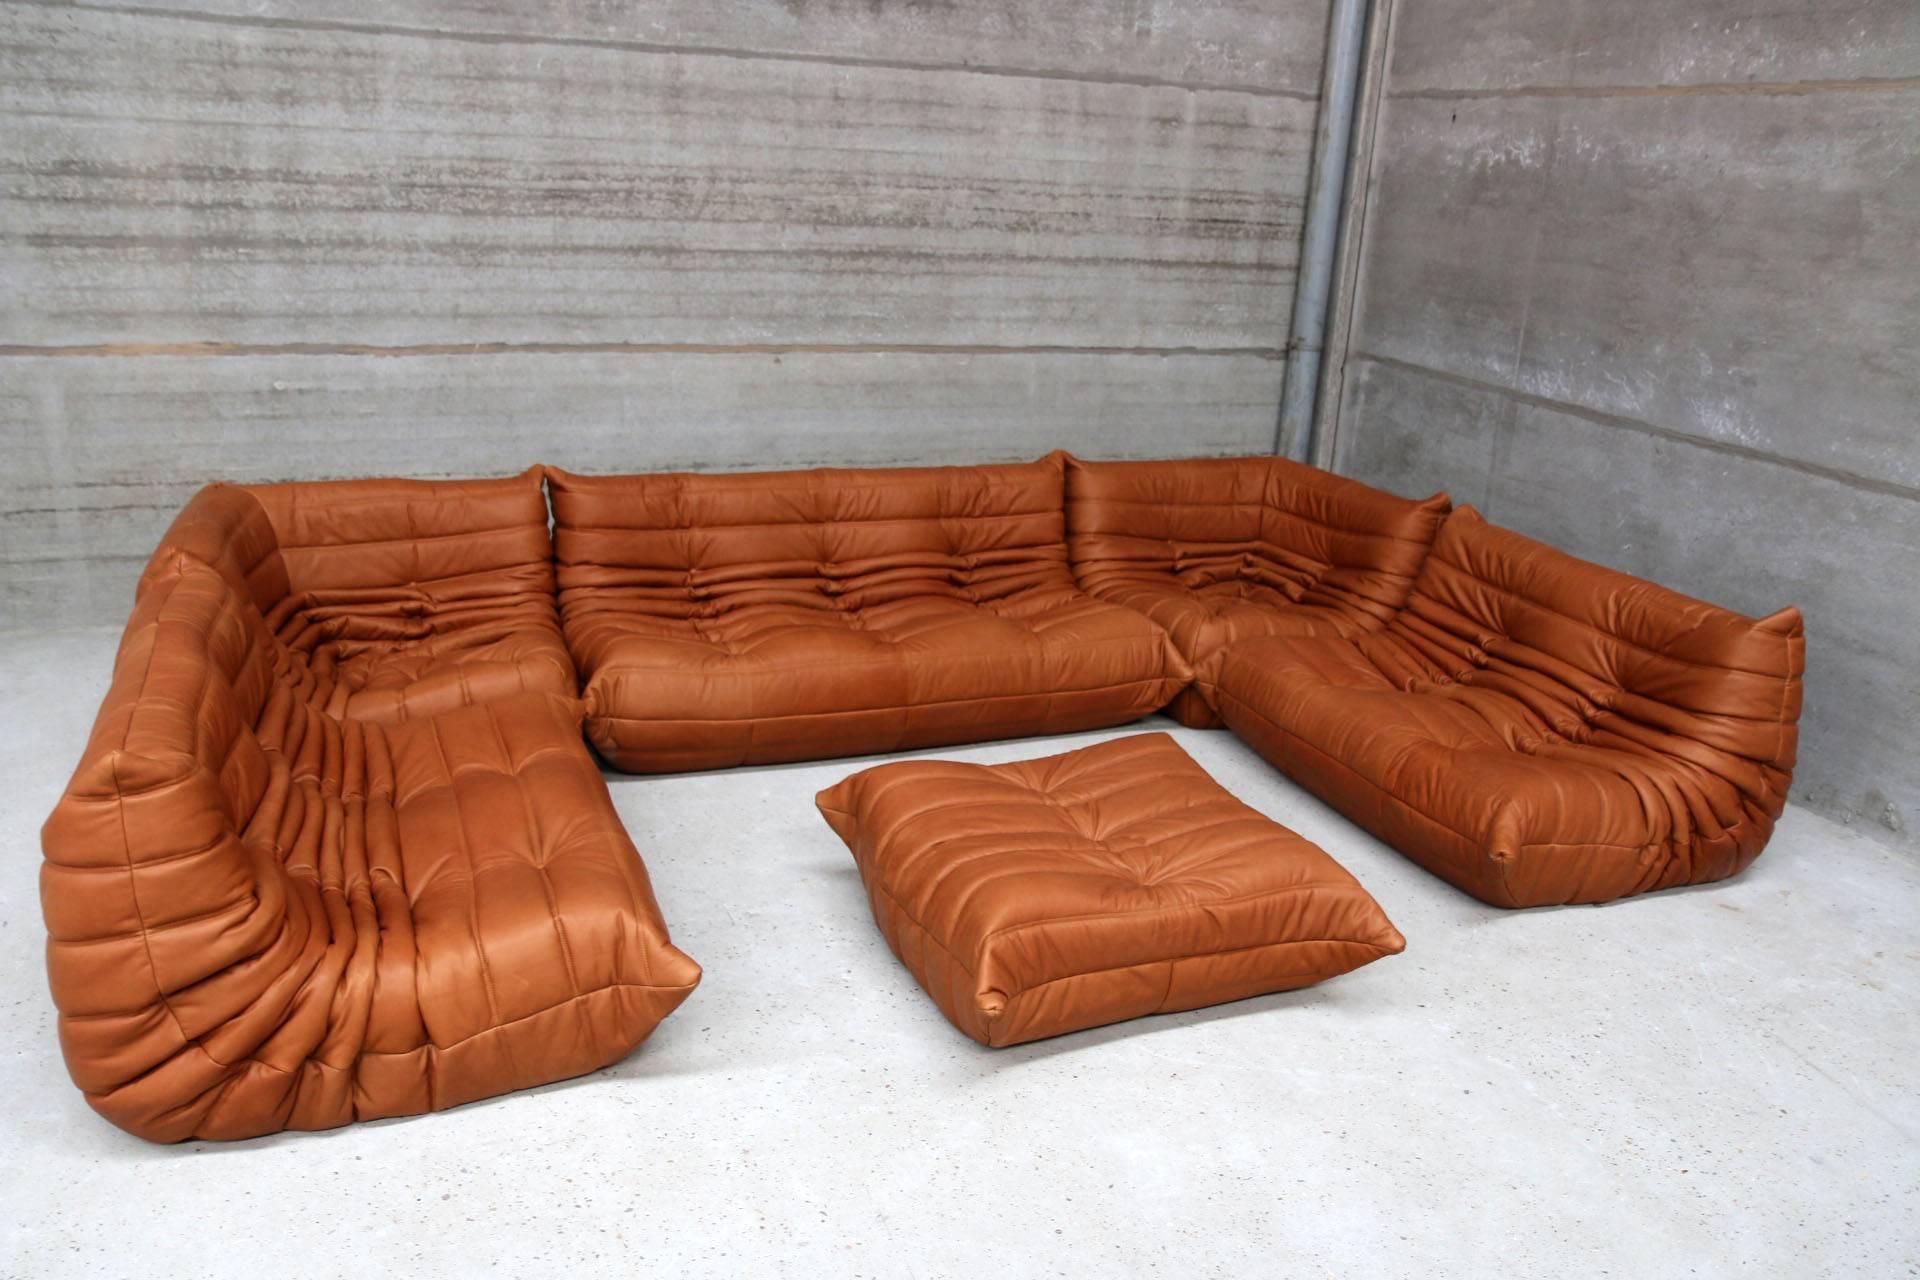 This set was designed by Michel Ducaroy in 1974 and was manufactured by Ligne Roset. Reupholstered by funkyvintage Belgium in our rich full grain cognac leather.
This set consists following pieces
1 x three-seat 174 x 102 x 70cm
2 x two-seat 131